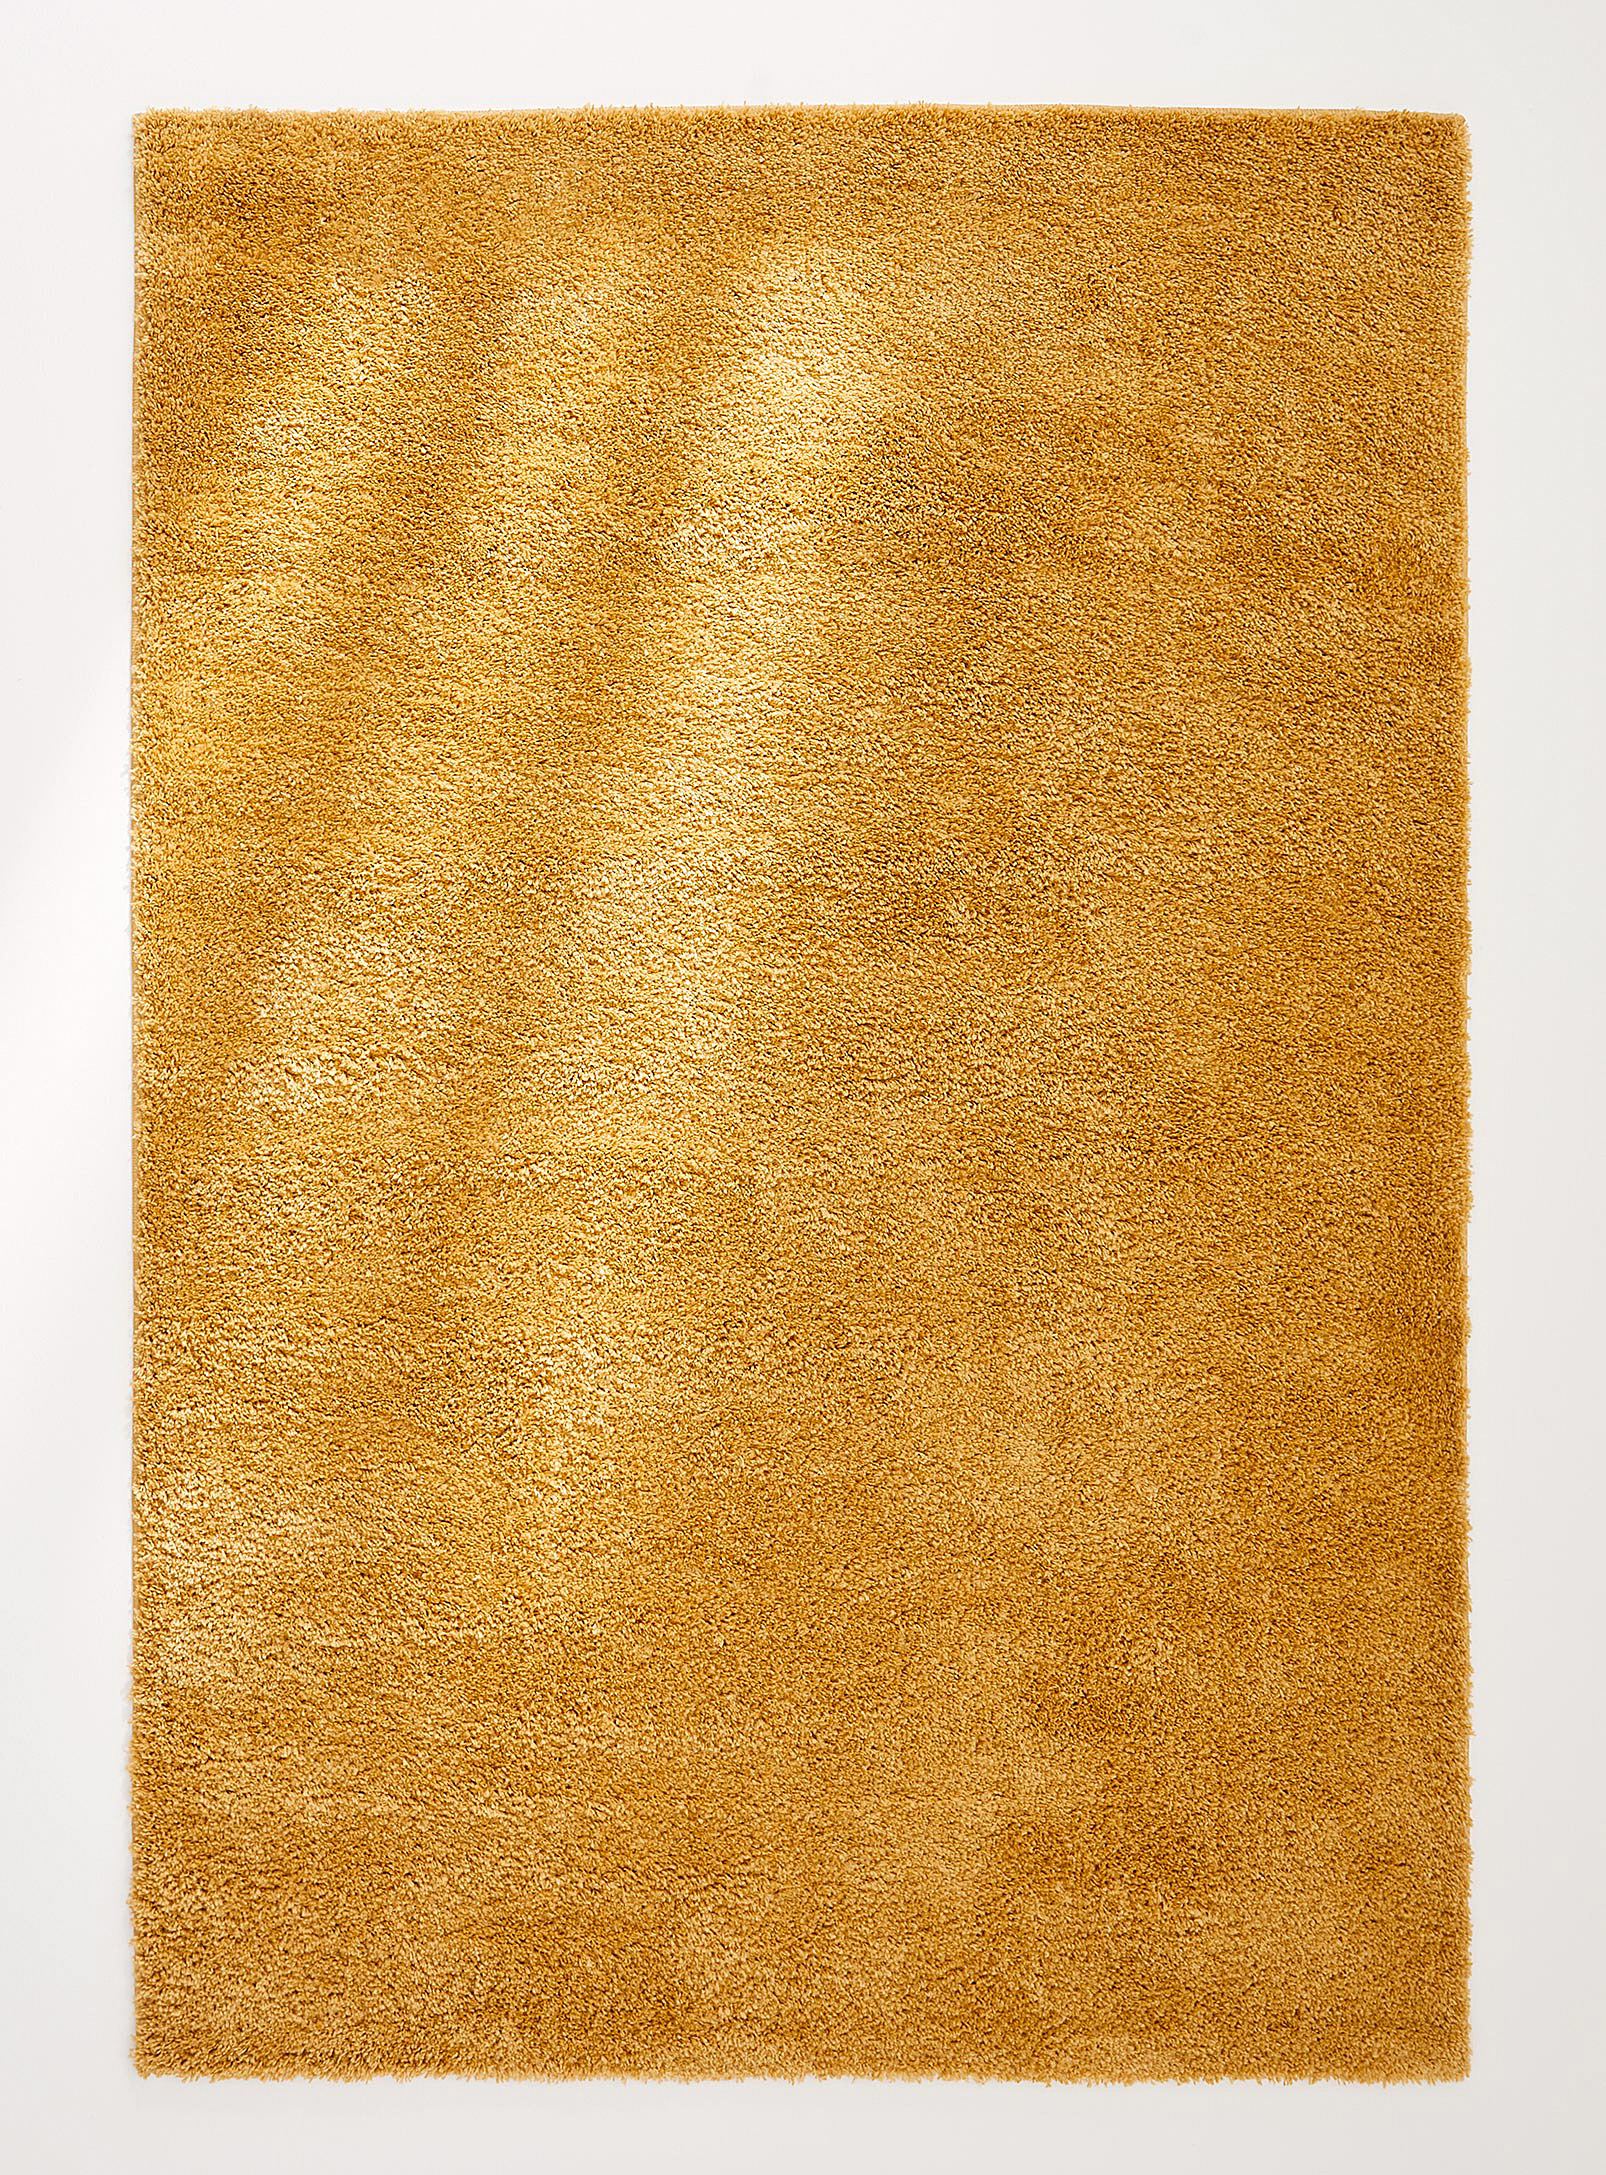 Simons Maison Nature's Essence Shag Rug See Available Sizes In Dark Yellow